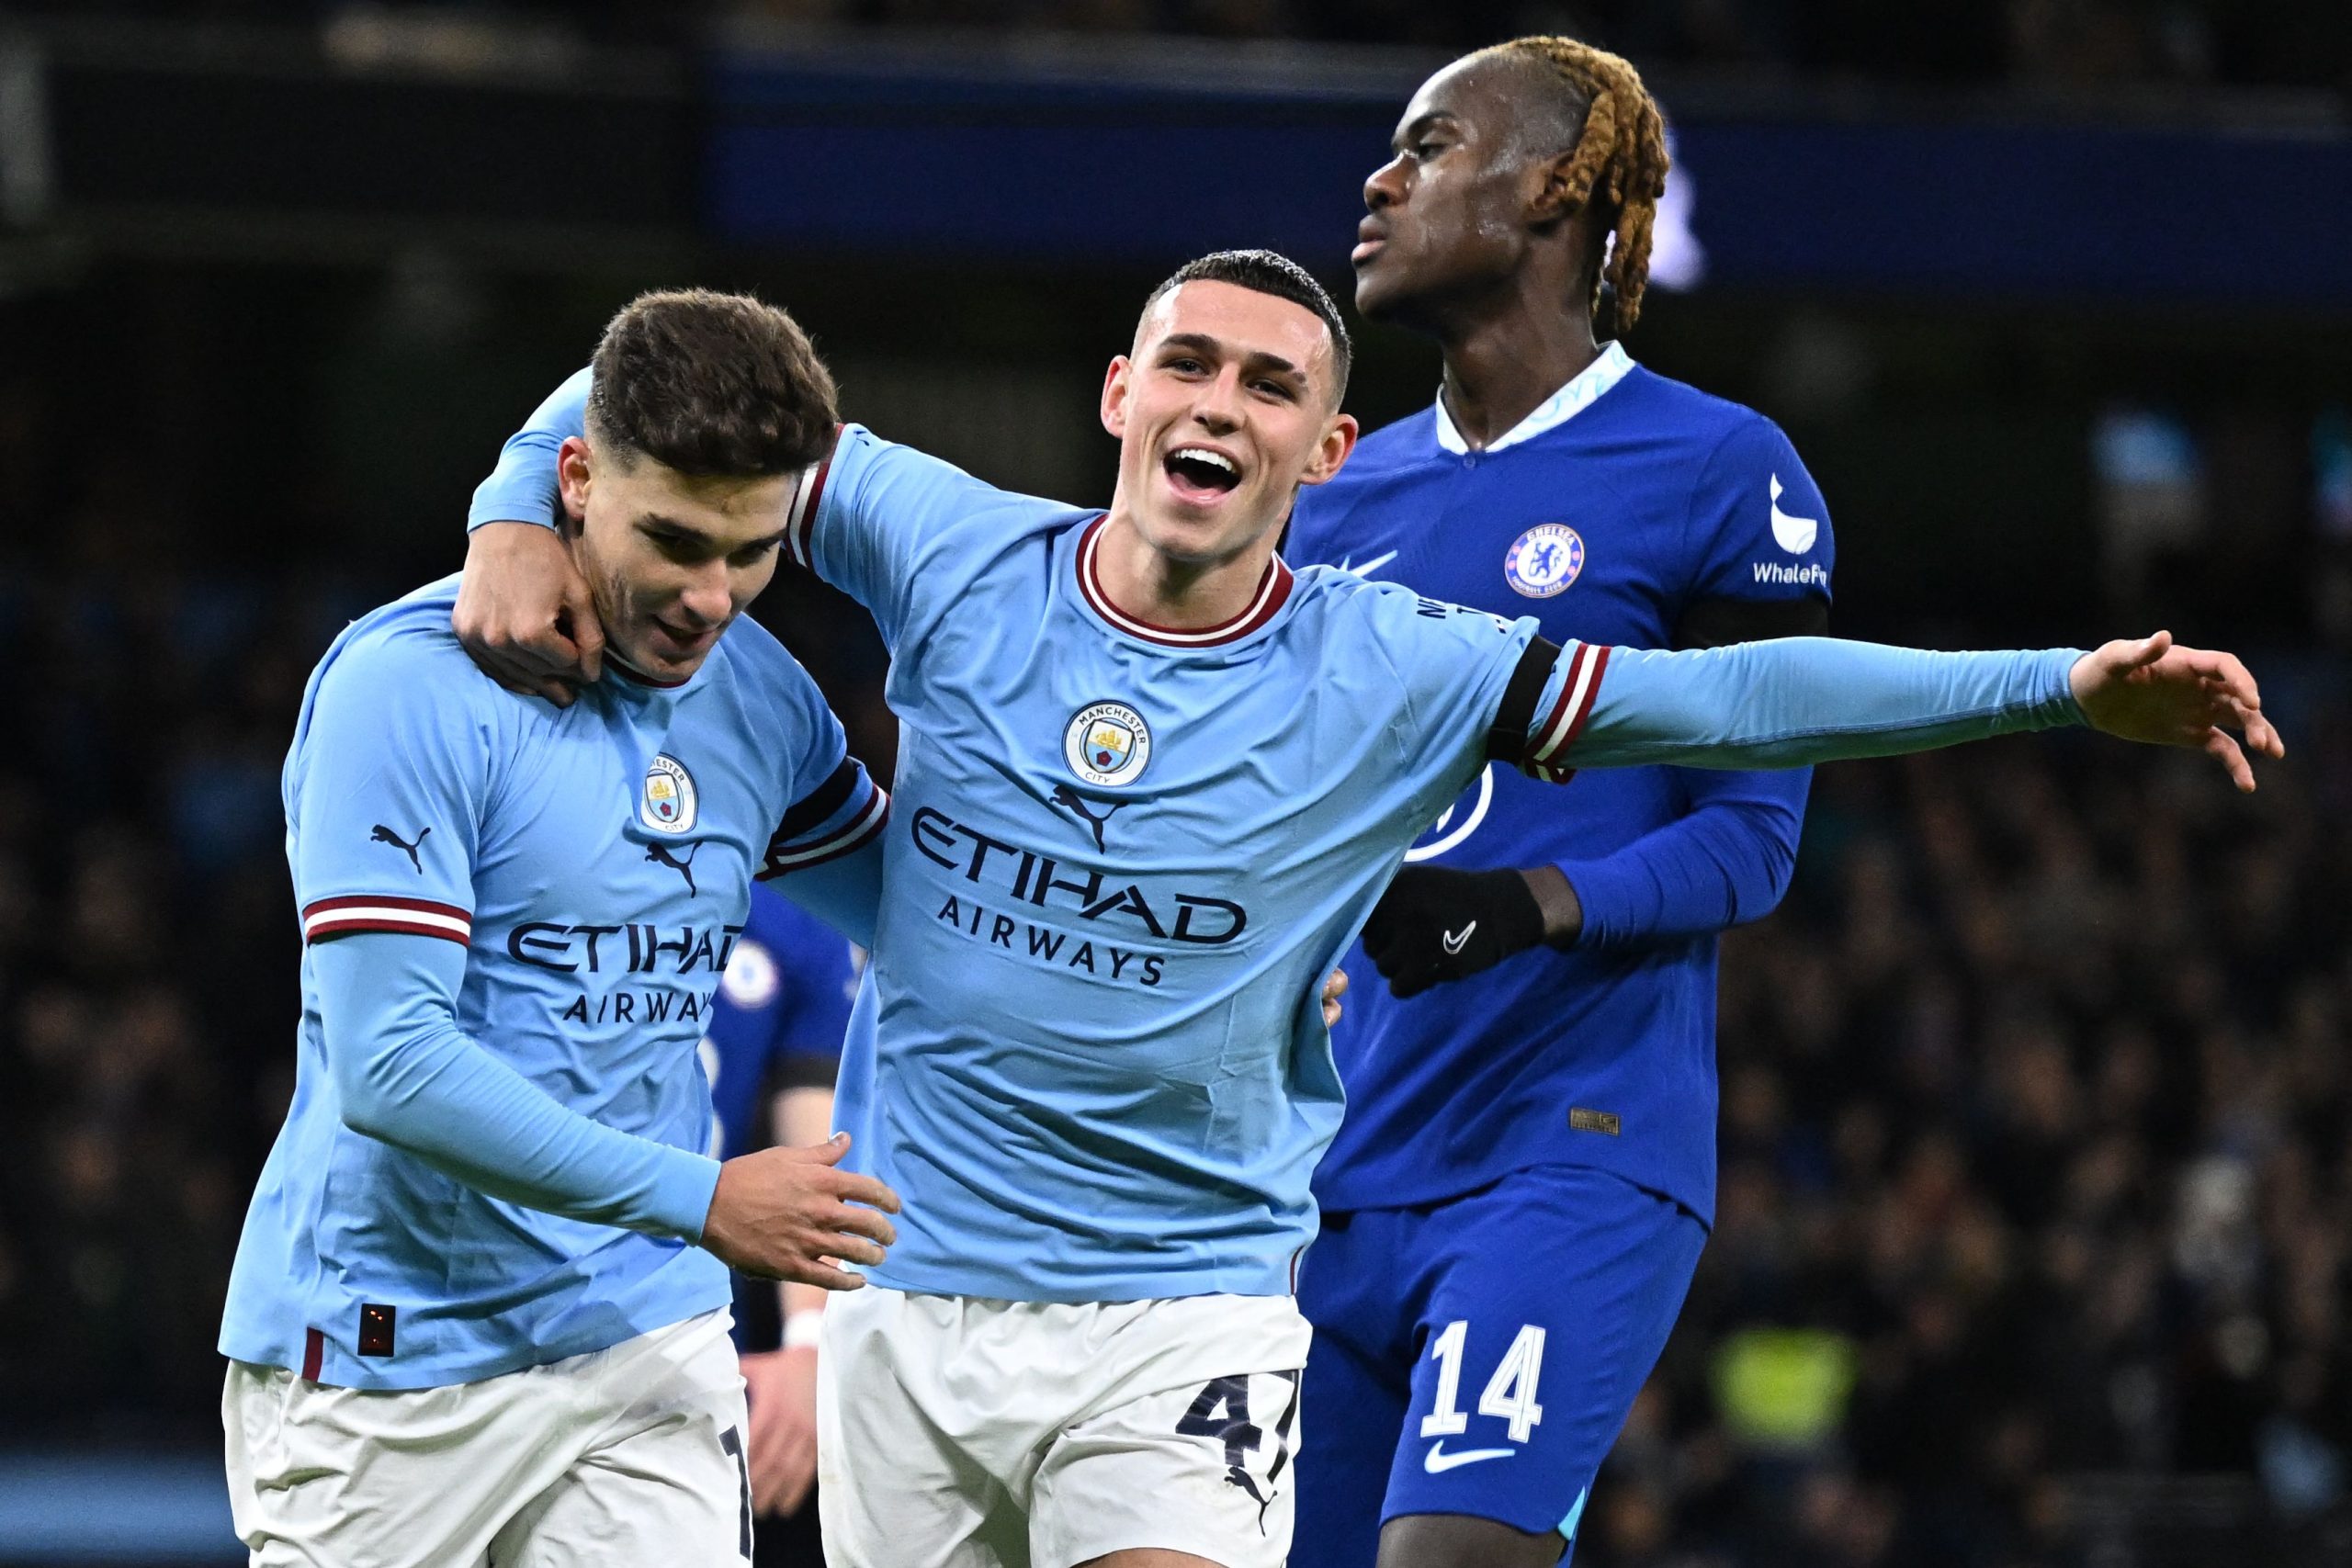 Manchester City's Argentinian striker Julian Alvarez celebrates with Phil Foden after scoring against Chelsea in the FA Cup - January 2023.